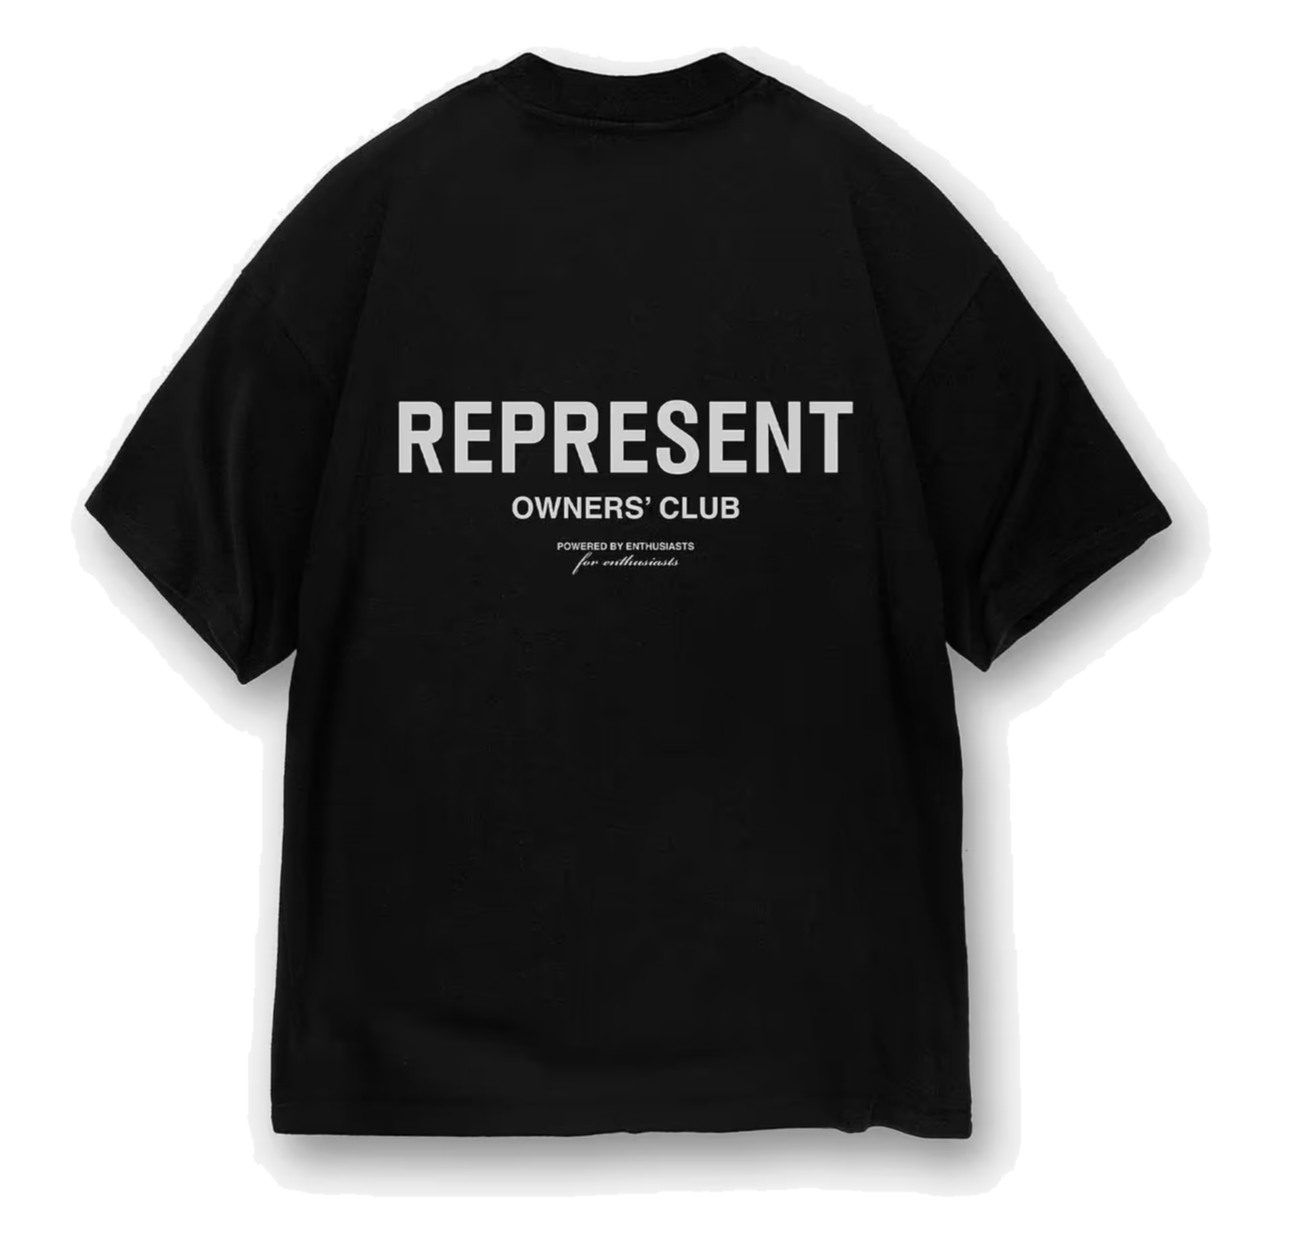 Represent Owners Club T-Shirt Black - OnSize